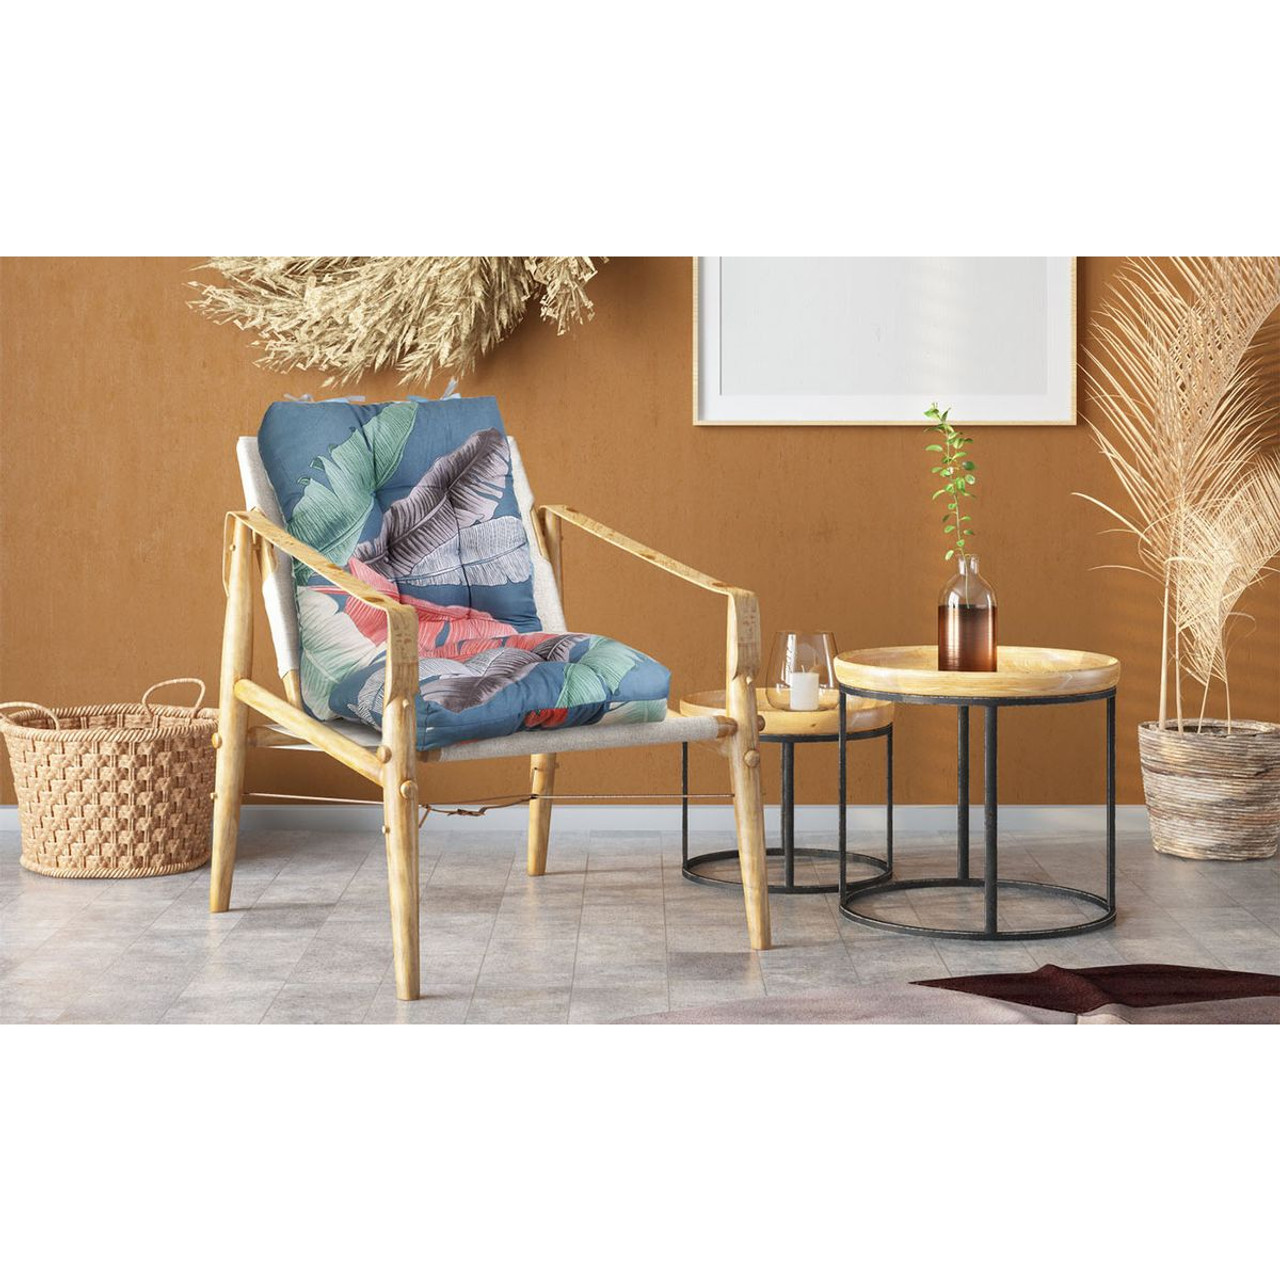 NewHome™ 2-Piece Rocking Chair Cushions product image